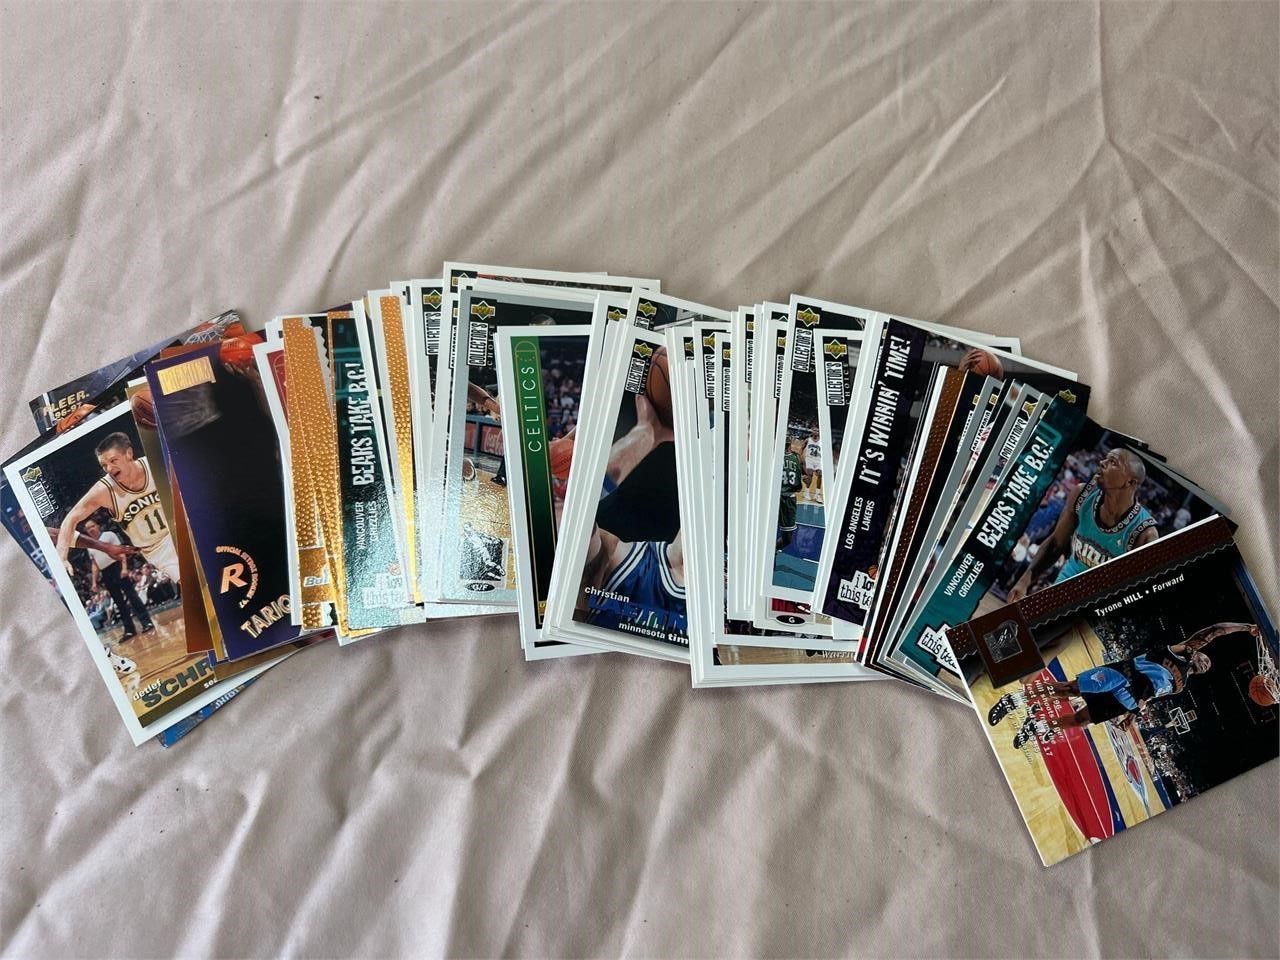 Lot of Basketball Cards